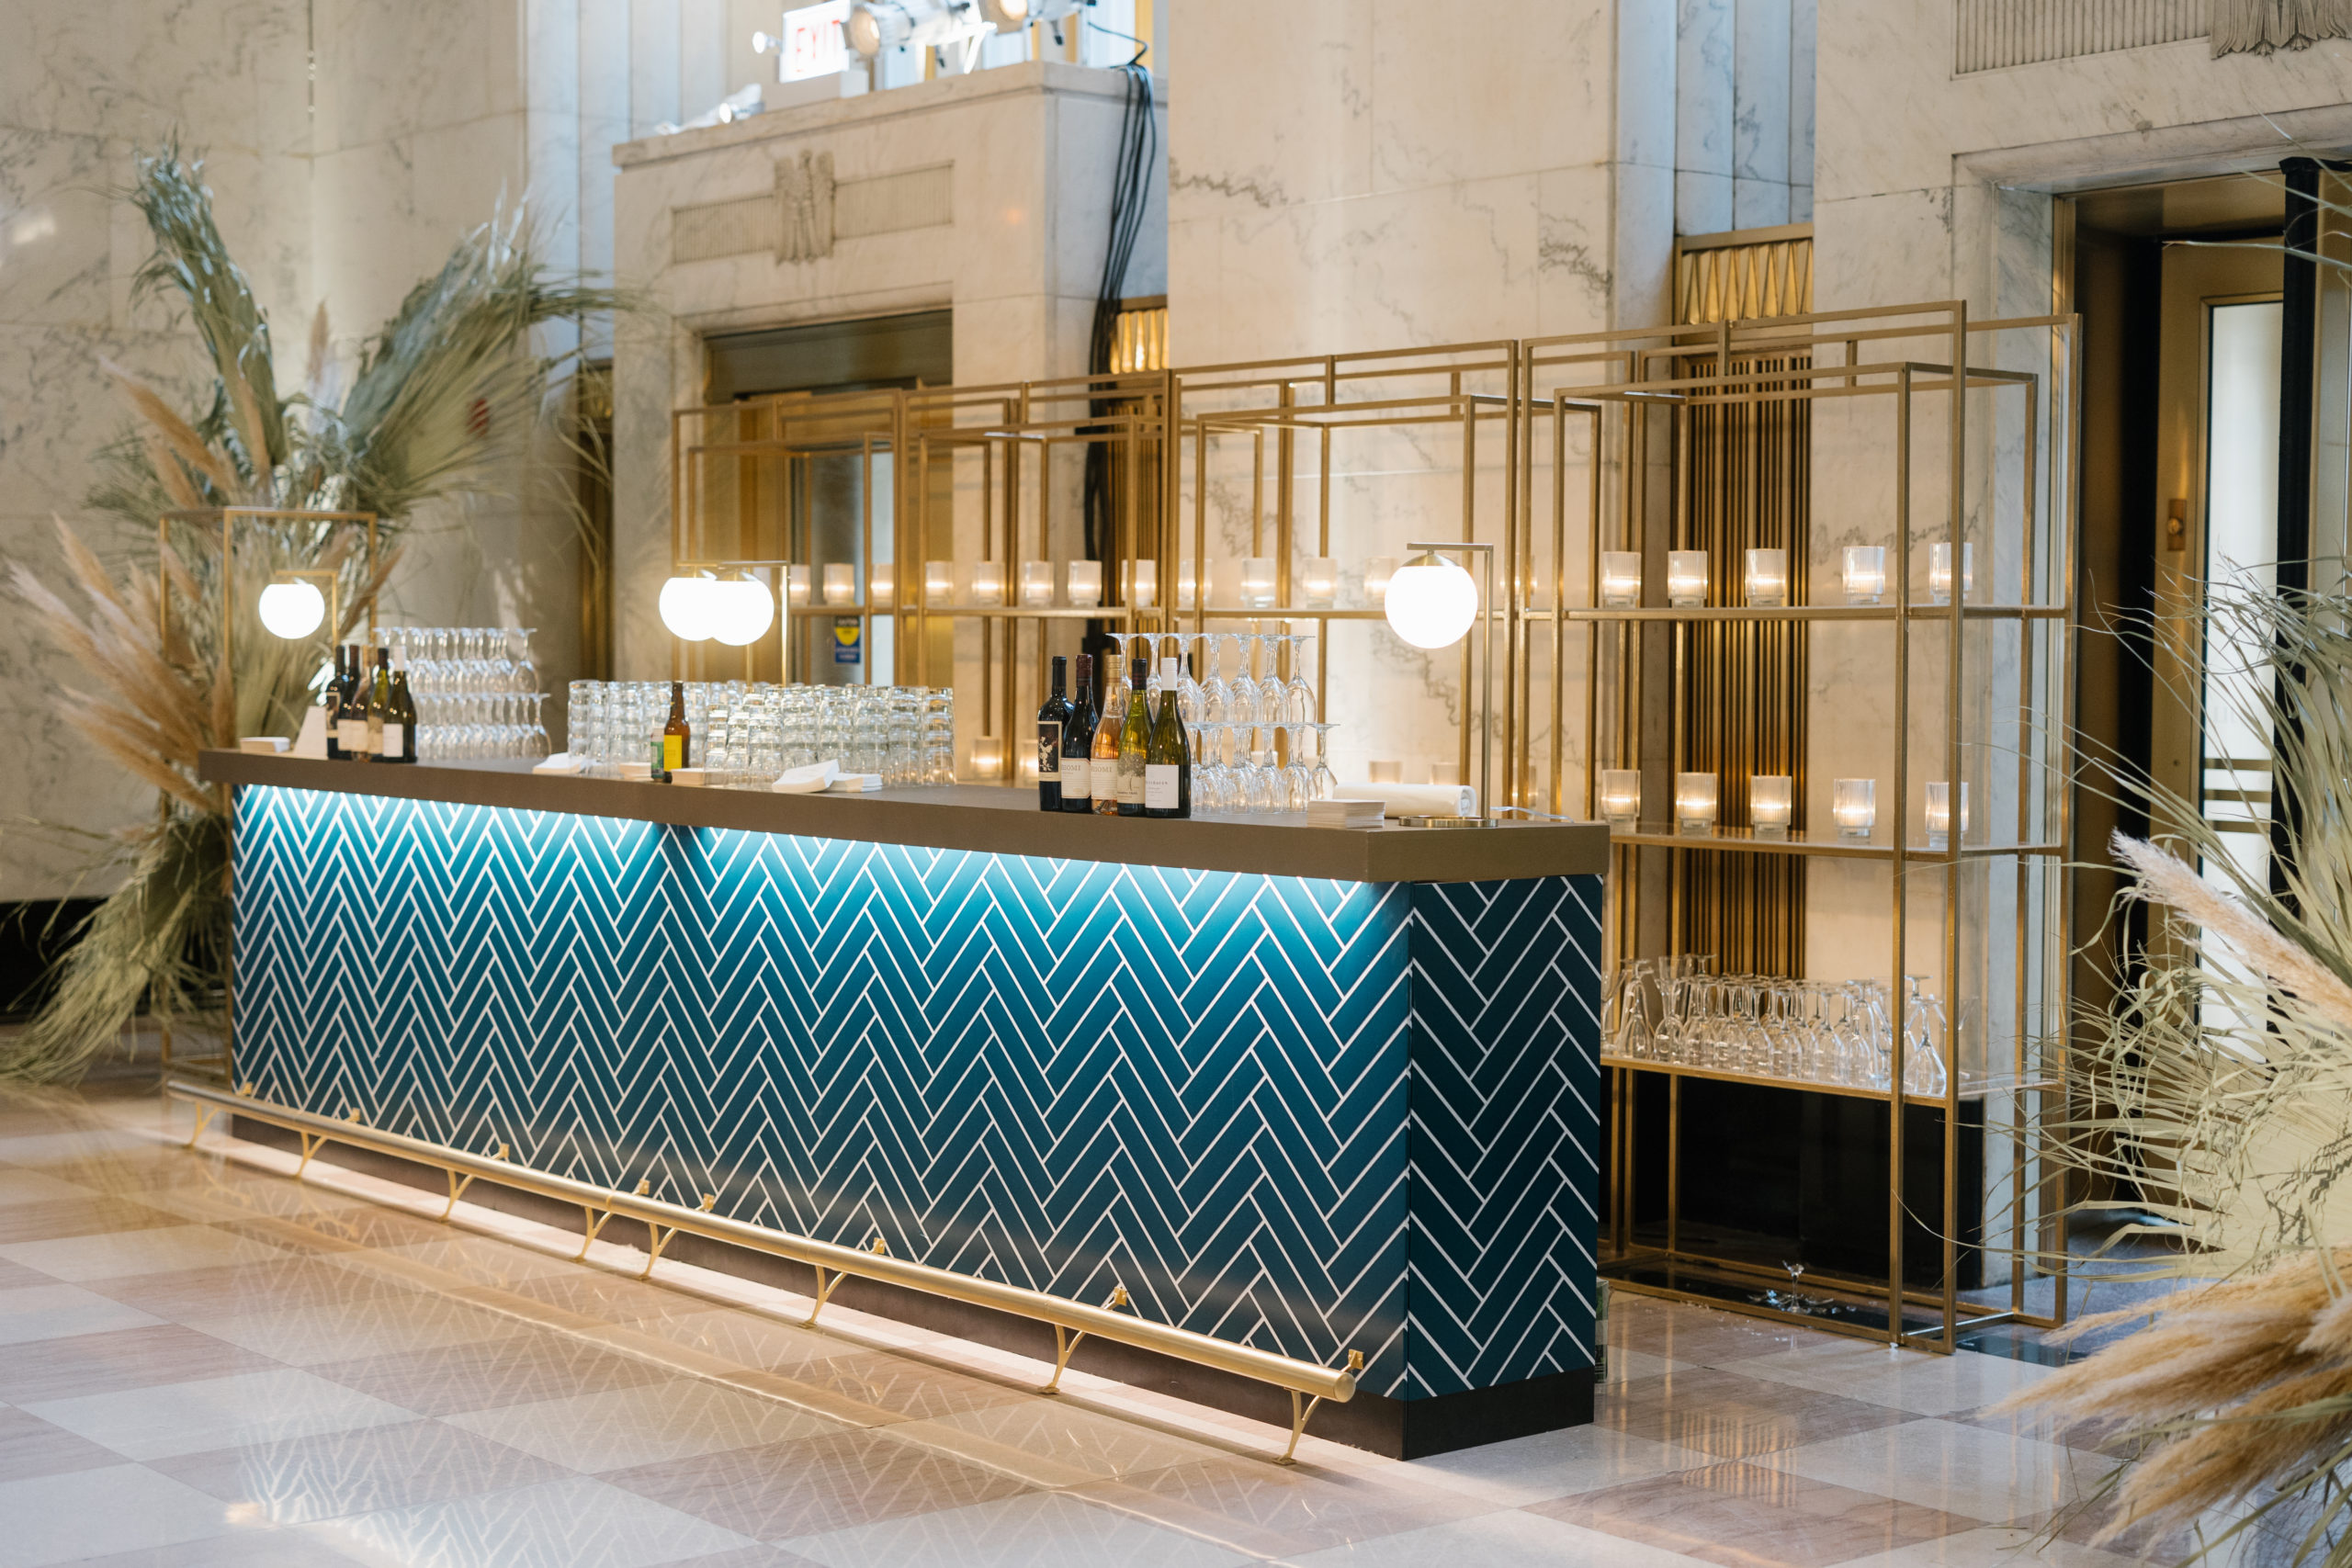 Art Deco Tiled Bar for Wedding at The Old Post Office in Chicago